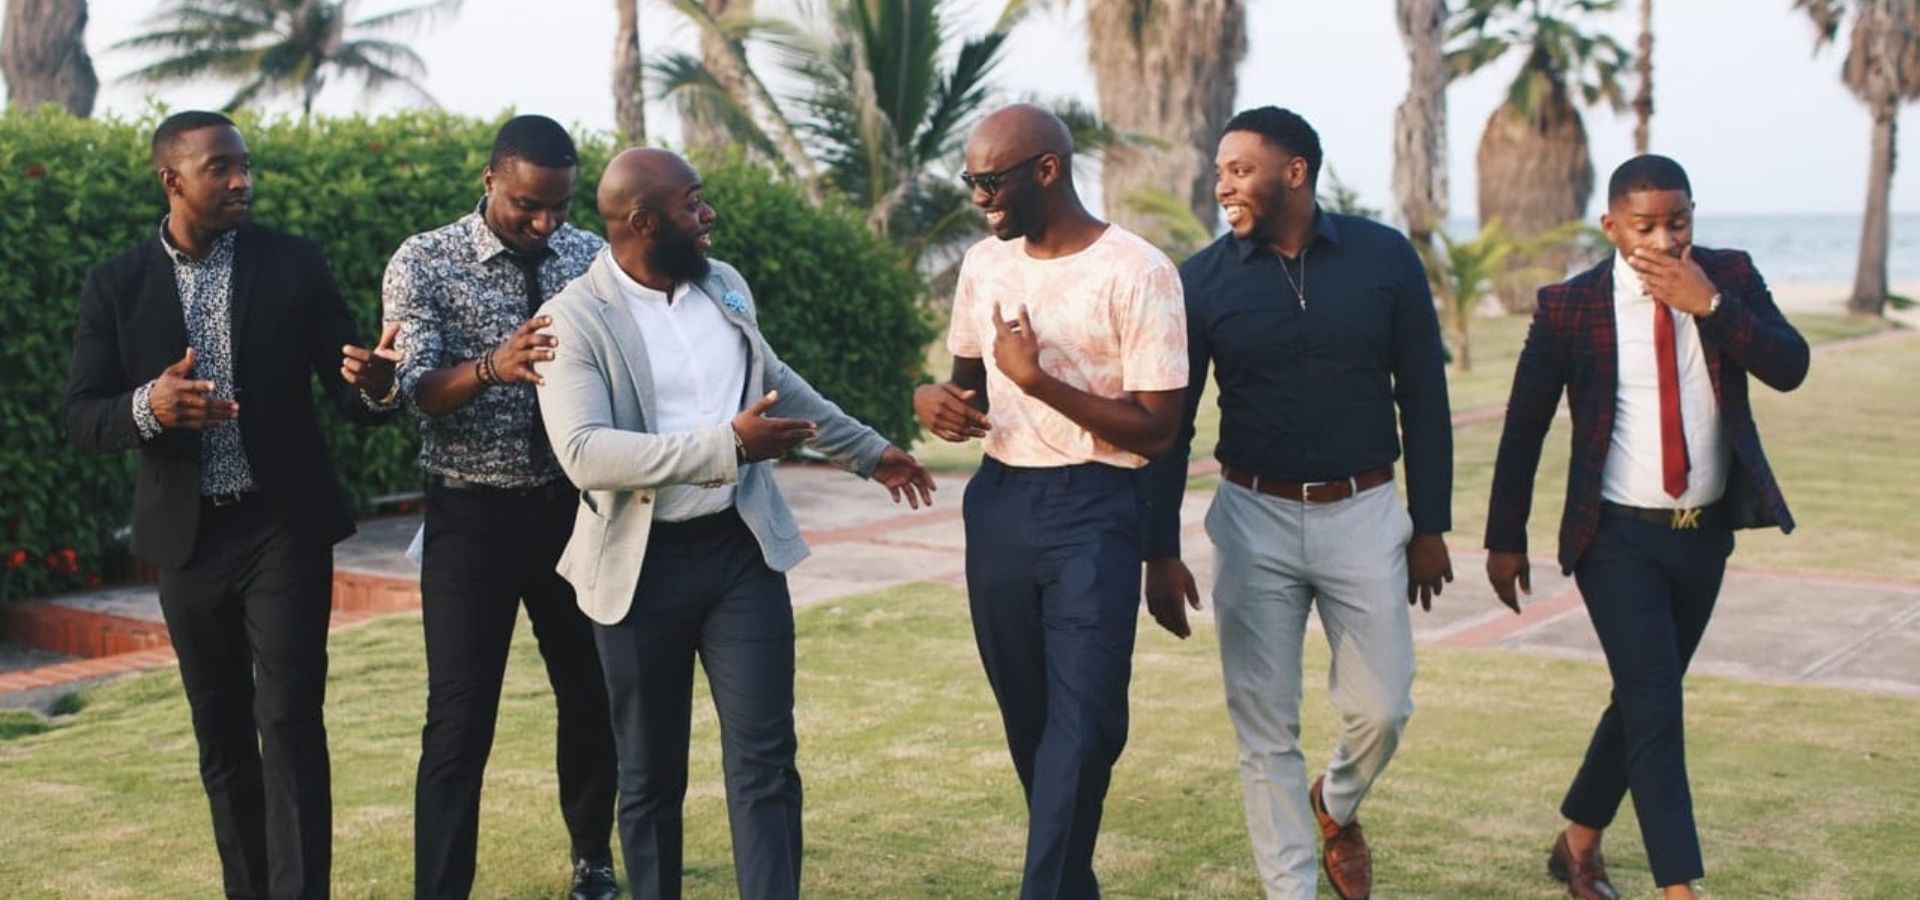 The Bro Code: I am My Brothers’ Keeper